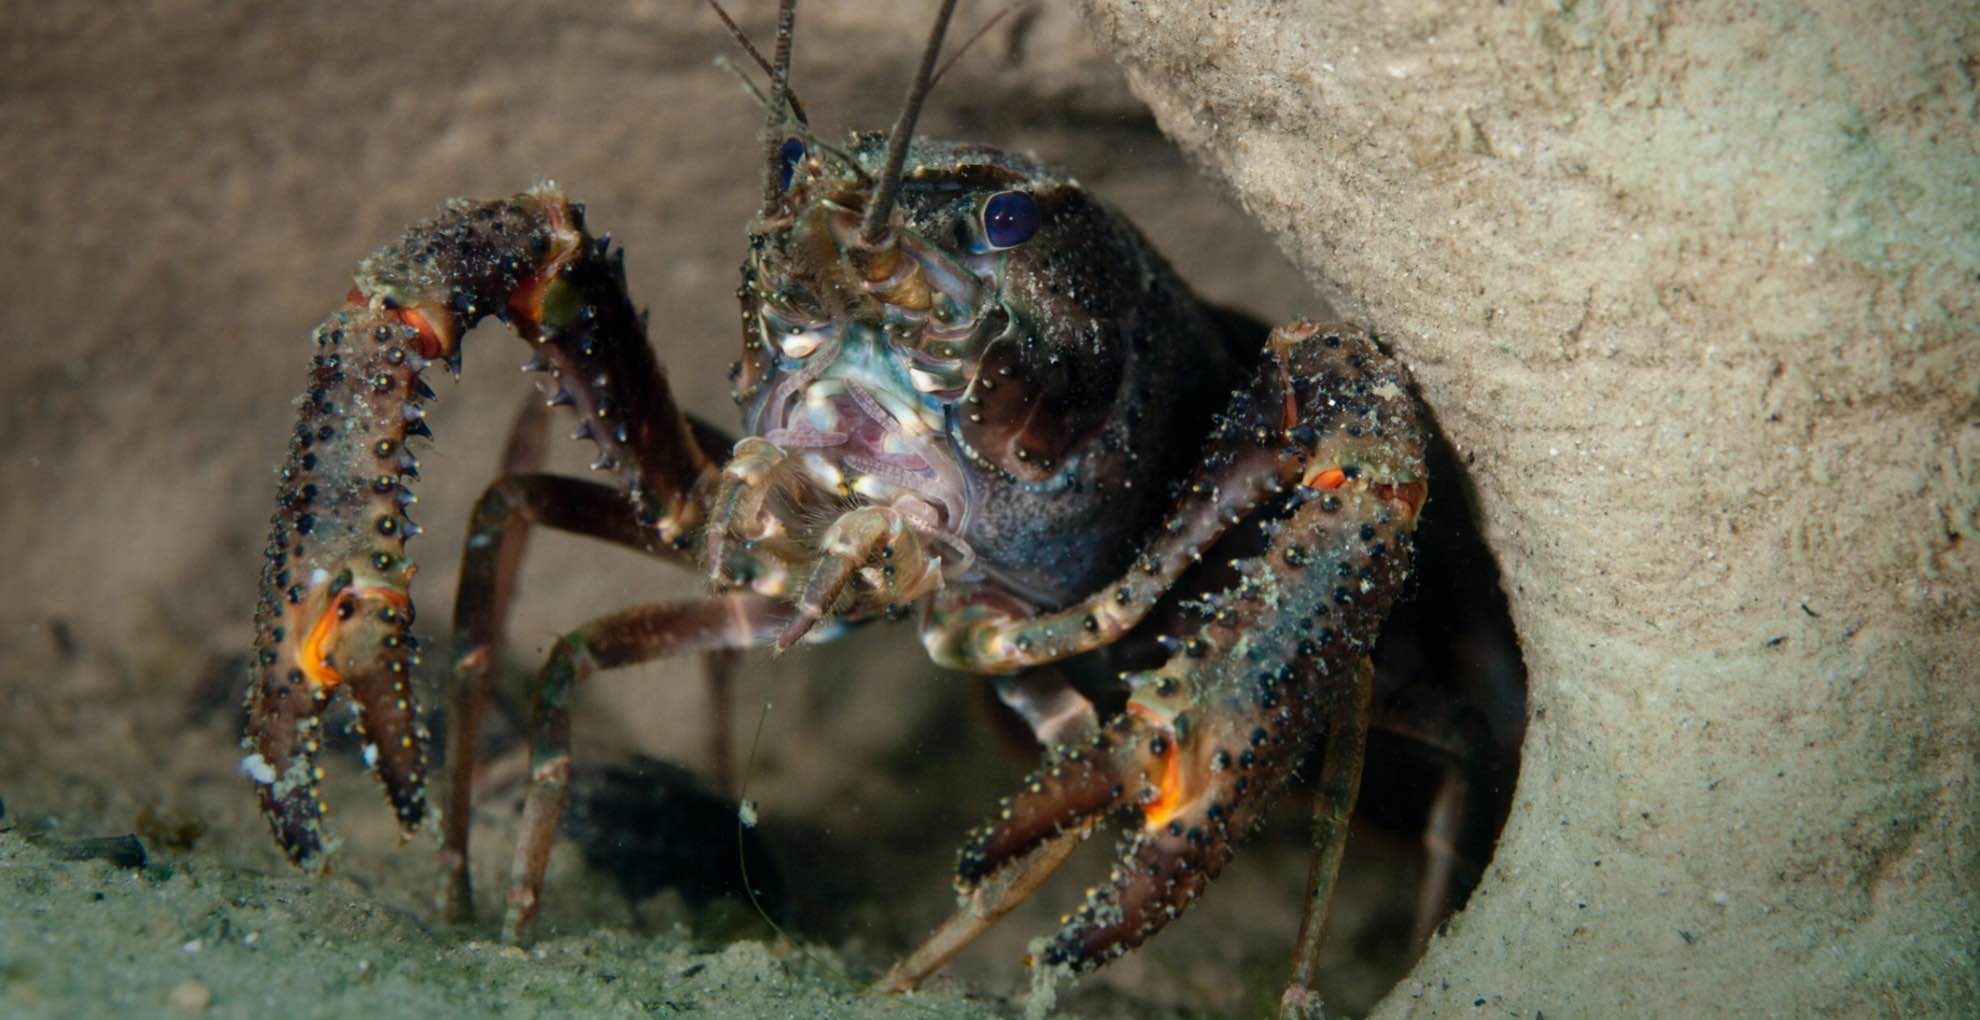 The northern kōura (Paranephrops planifrons), or freshwater crayfish, is both economically and culturally significant to the indigenous Māori people of New Zealand.